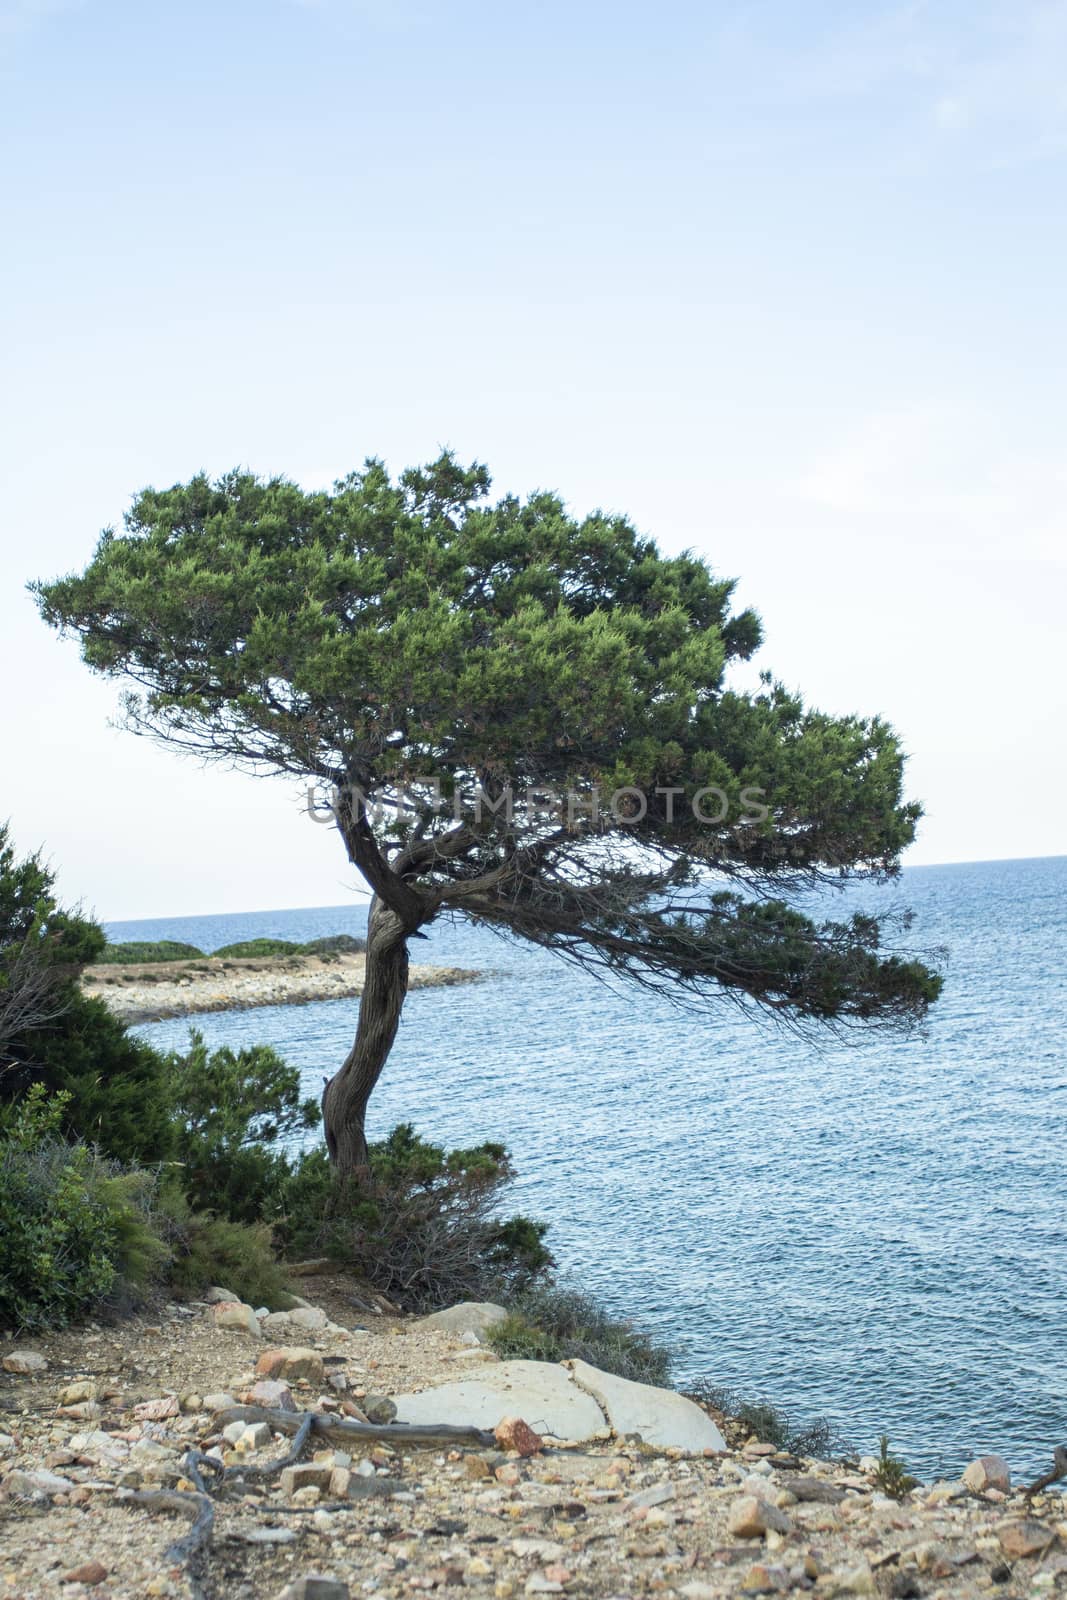 Sardinian tree in nature 2 by pippocarlot